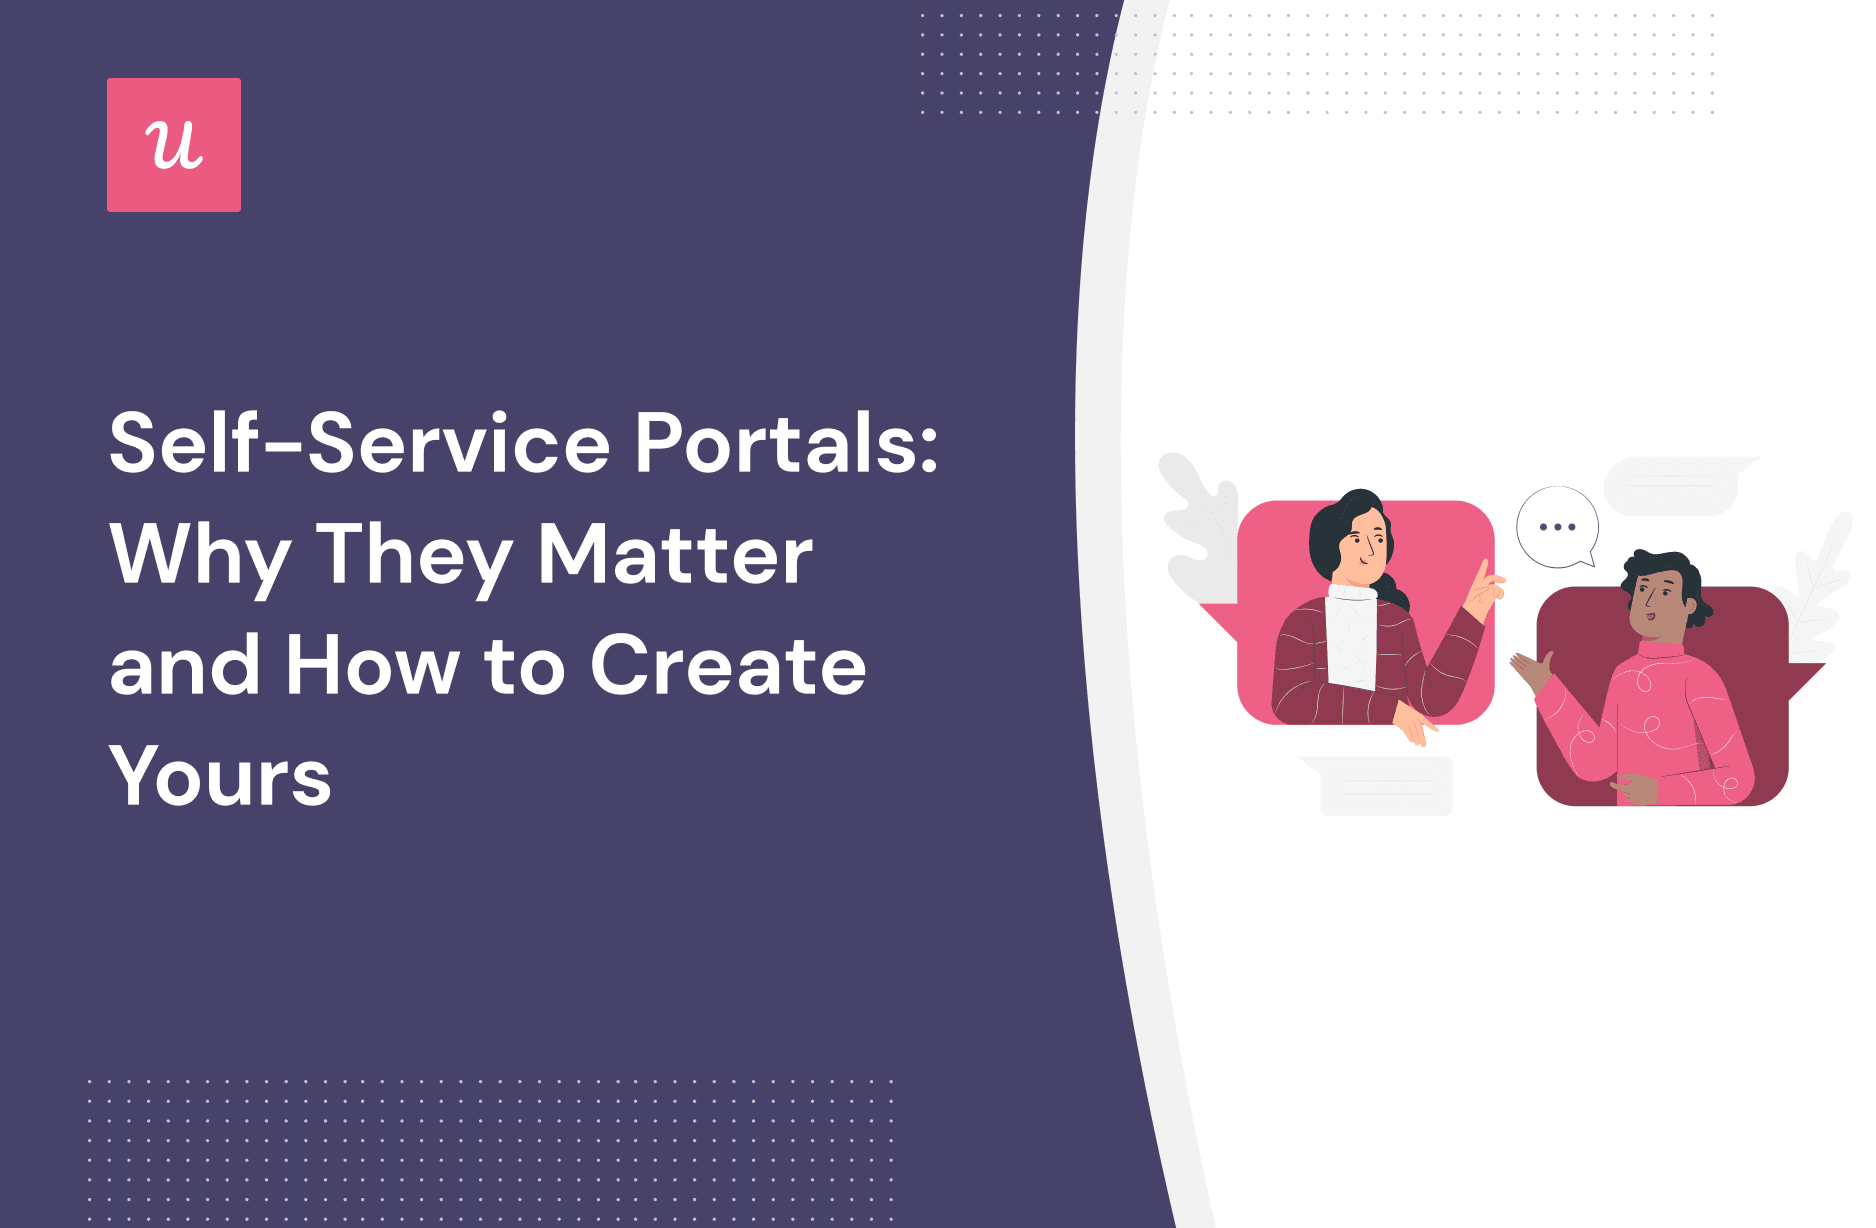 Self-Service Portals: Why They Matter and How to Create Yours cover